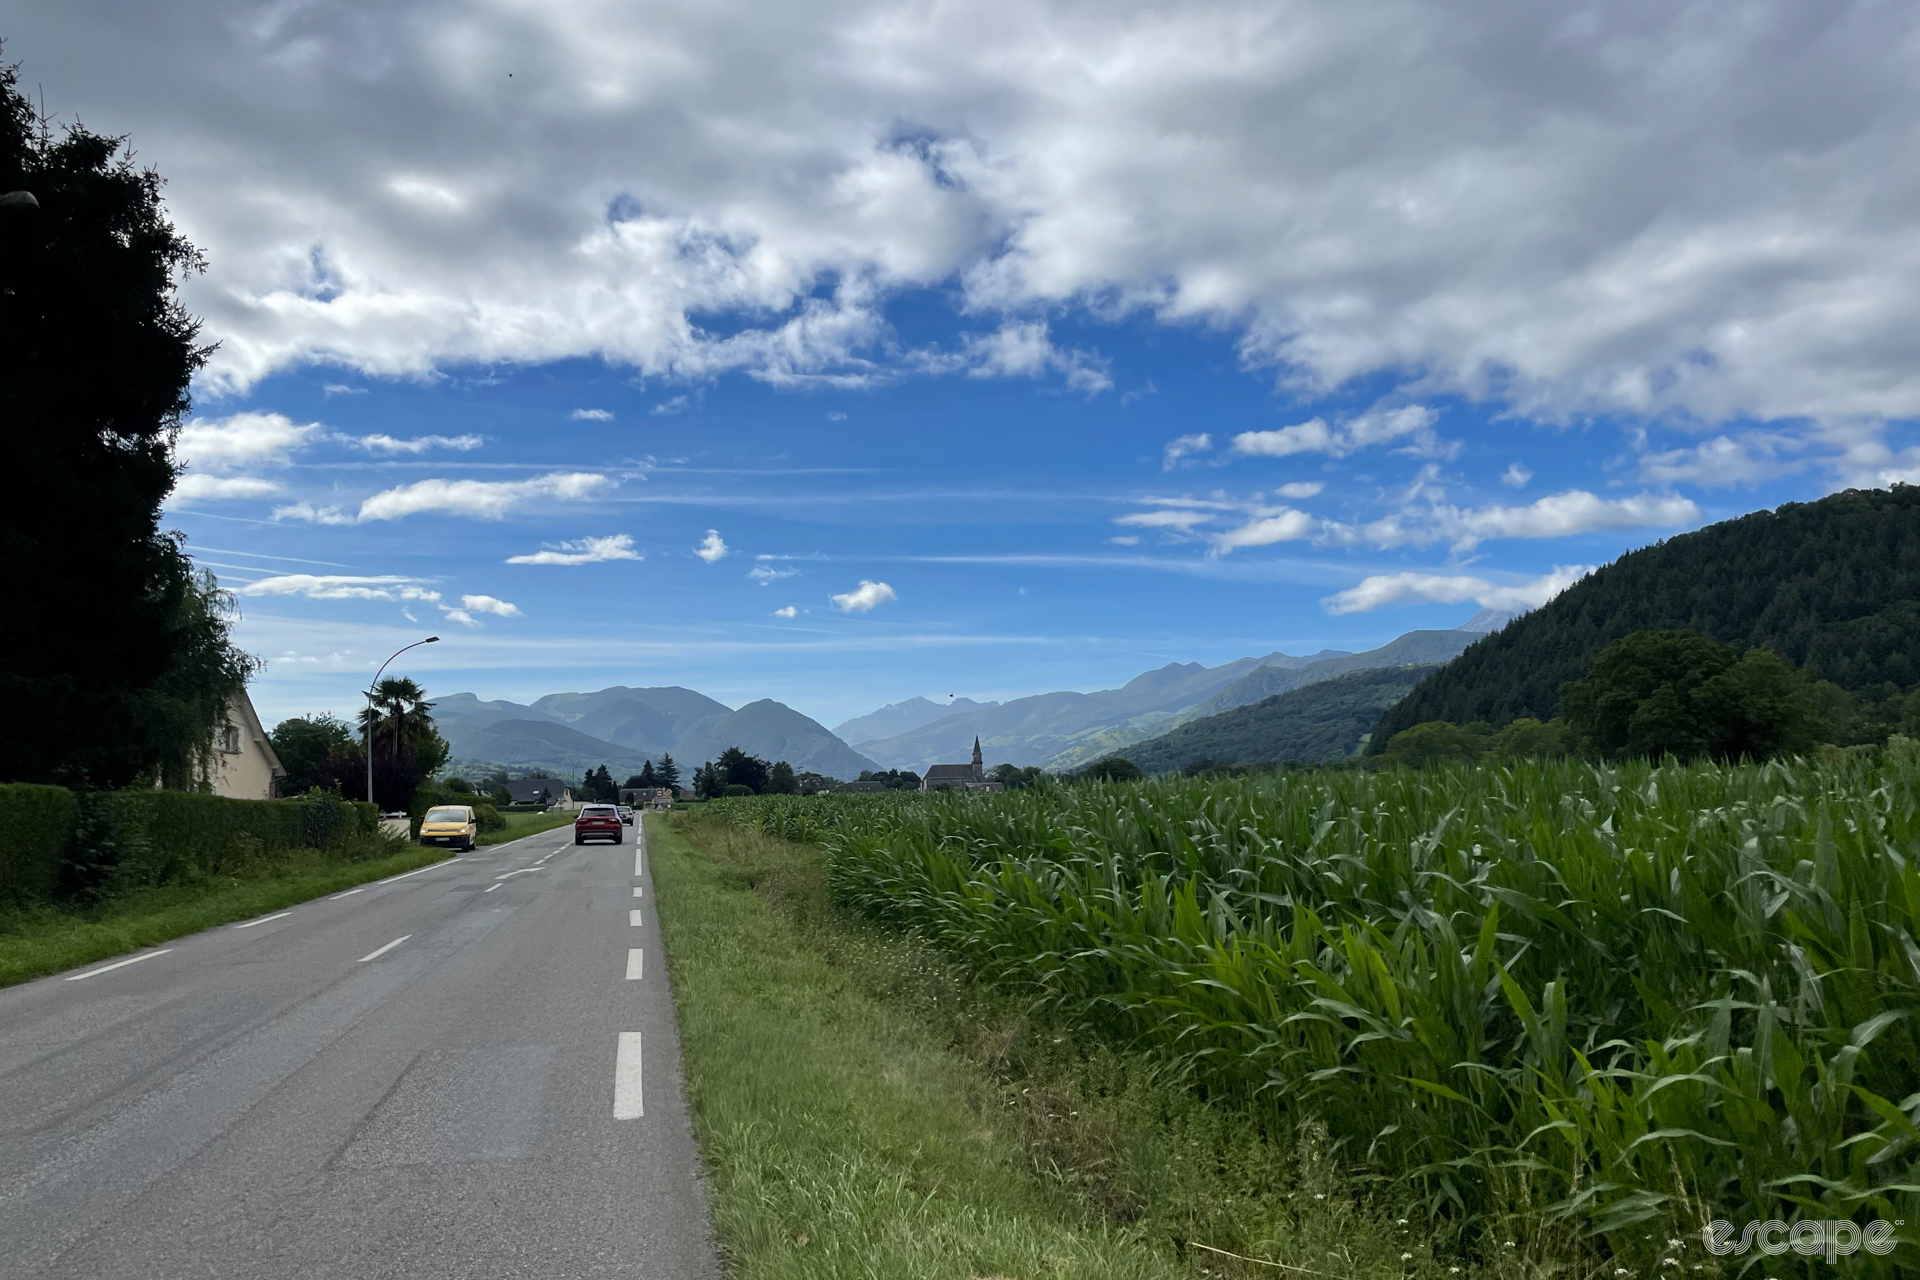 A view of the flat roads leading to the Pyrenees, with fields of corn framed in the distance by tall peaks. A church steeple appears in the middle distance.